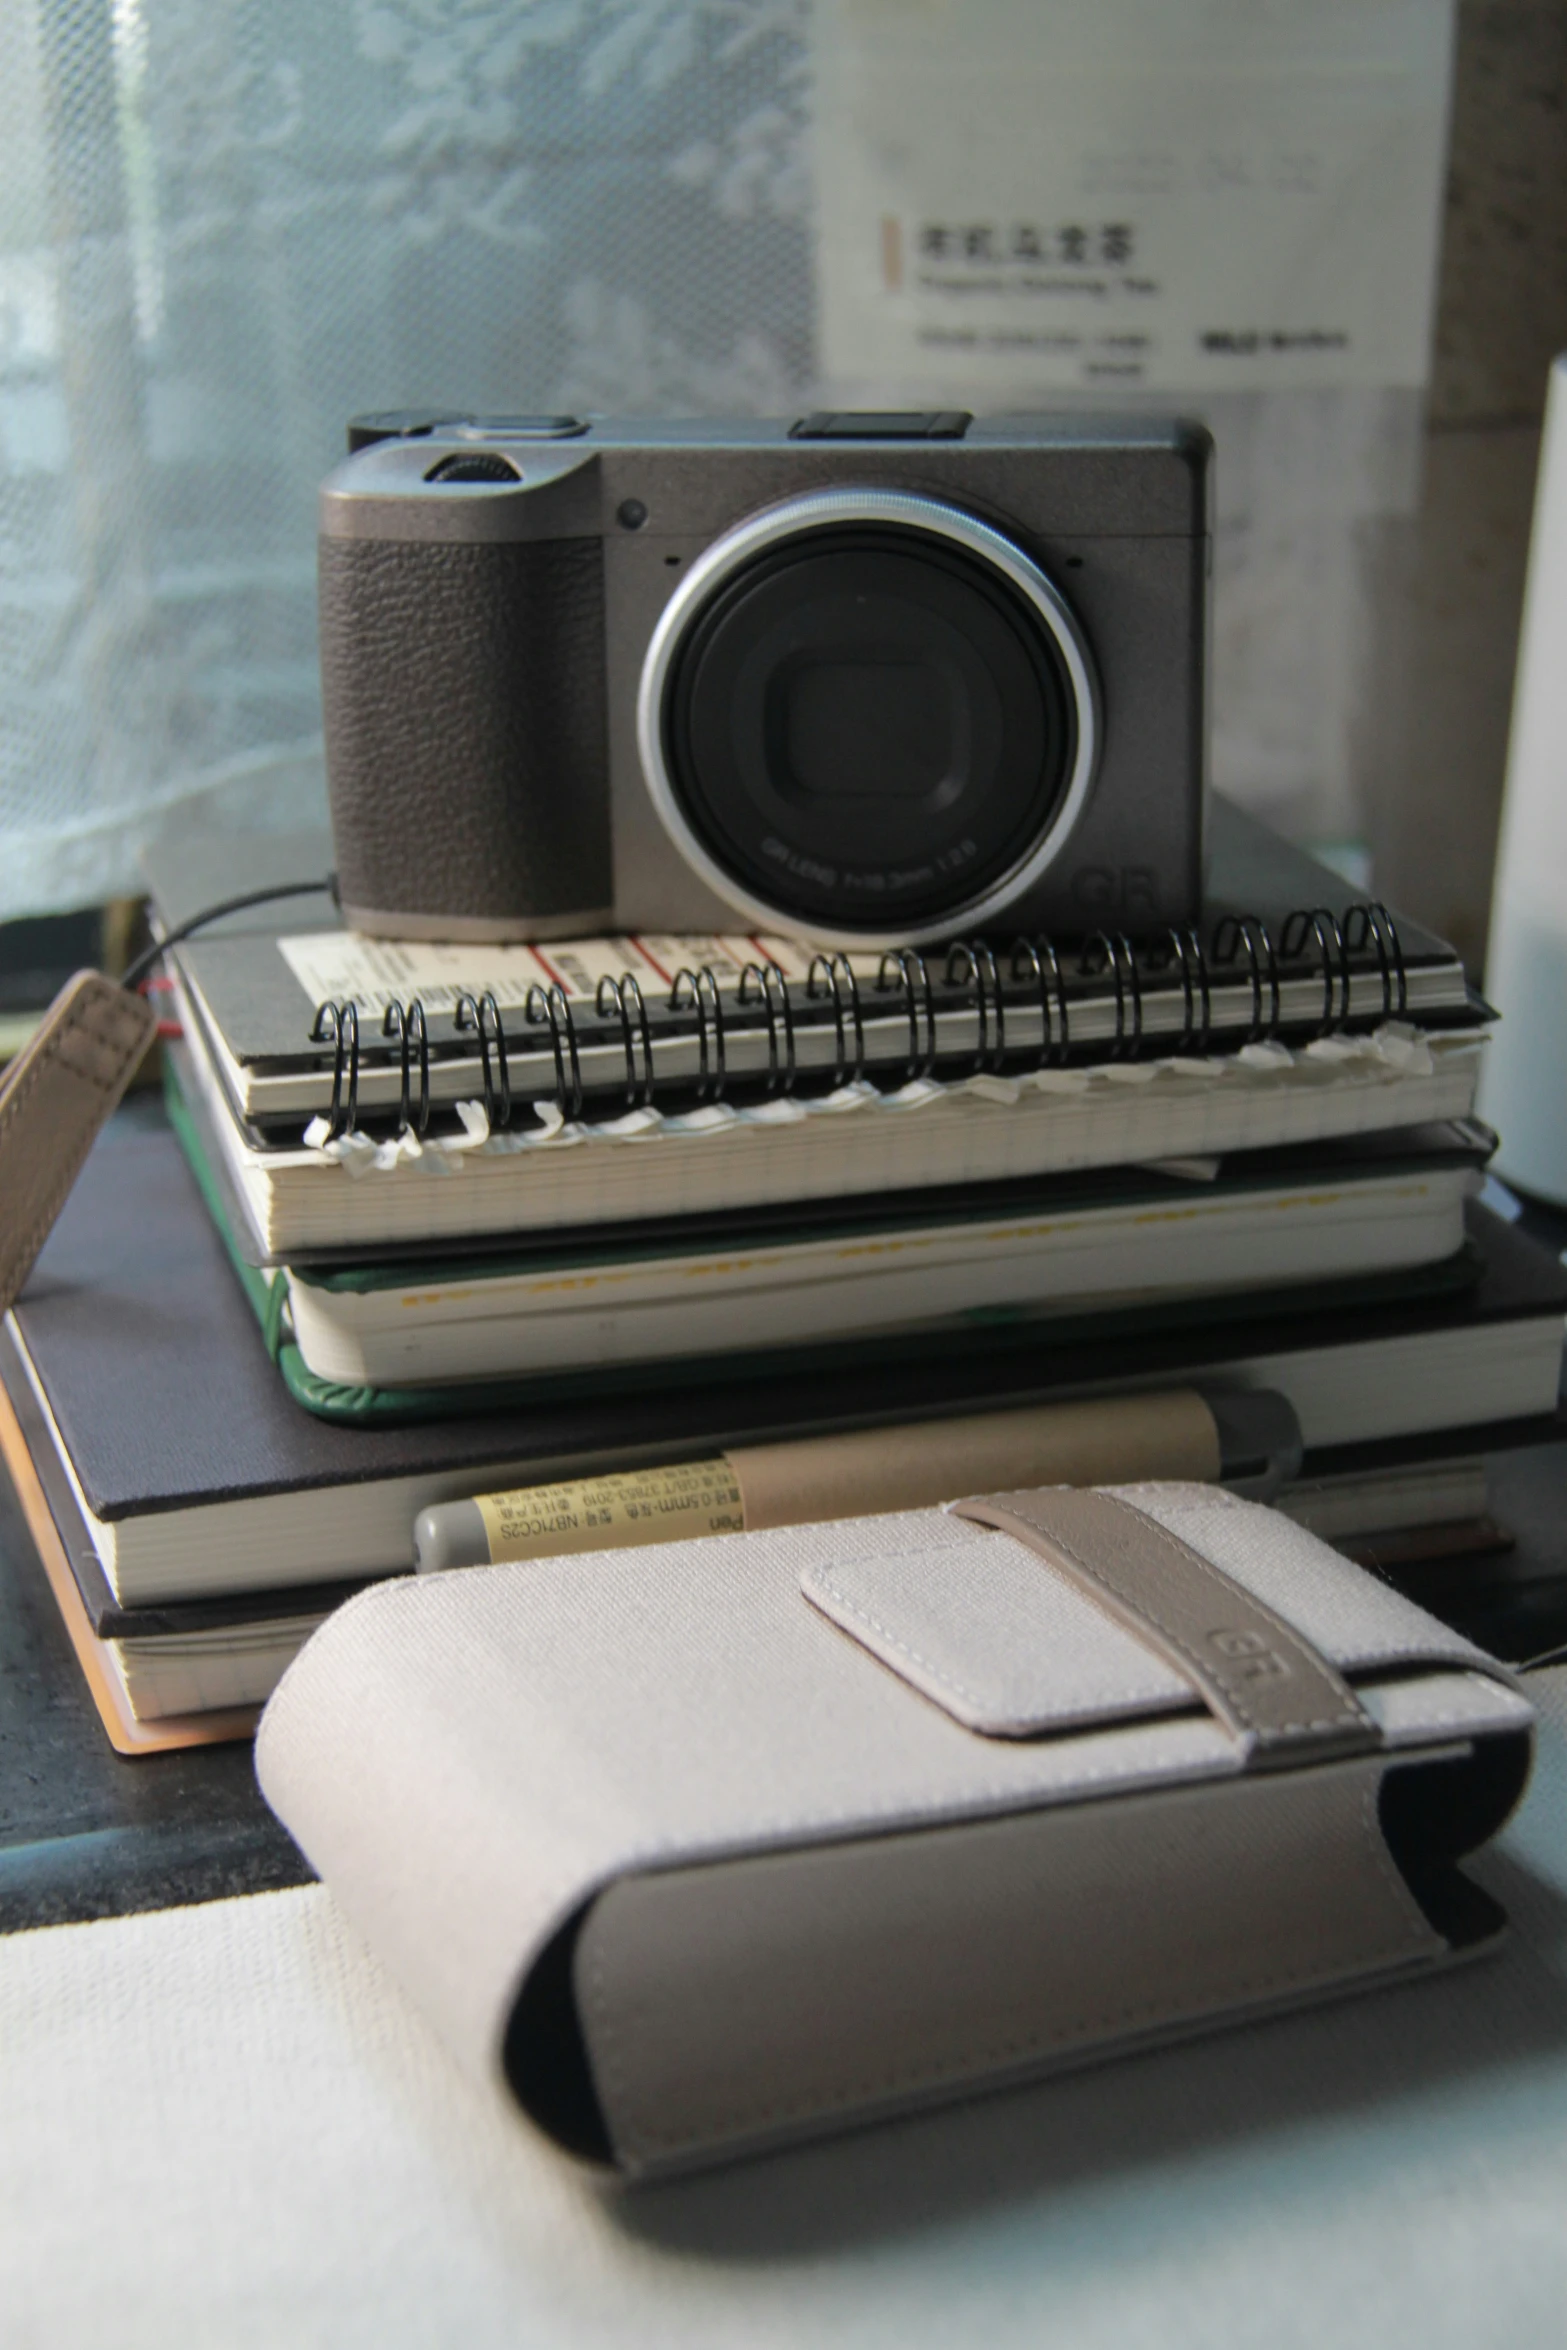 some books and a camera on a desk